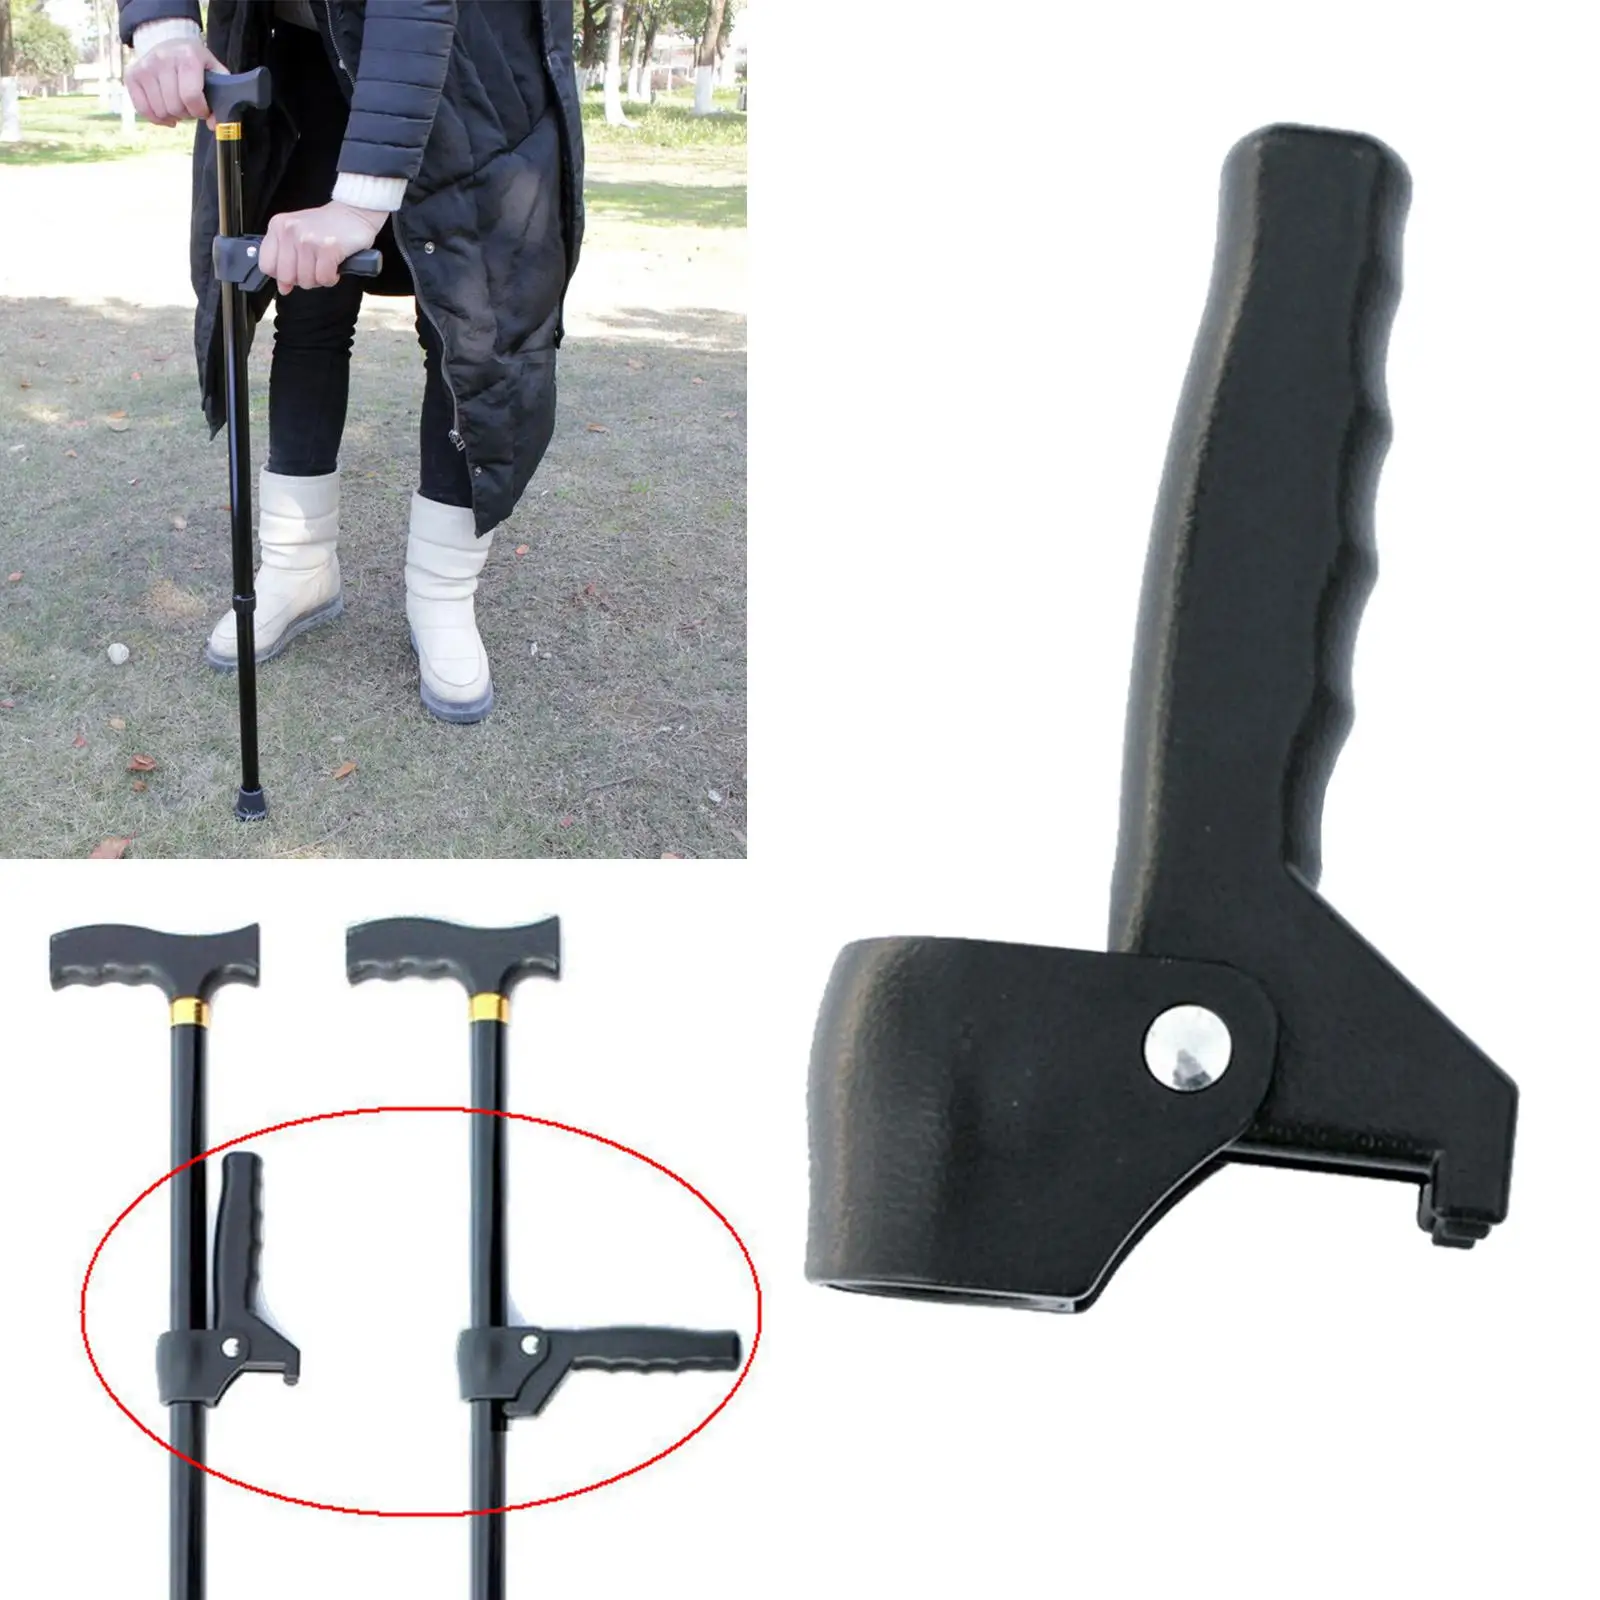 Old Man Seniors Walking Cane Accessories Extra Handle For Elderly Booster